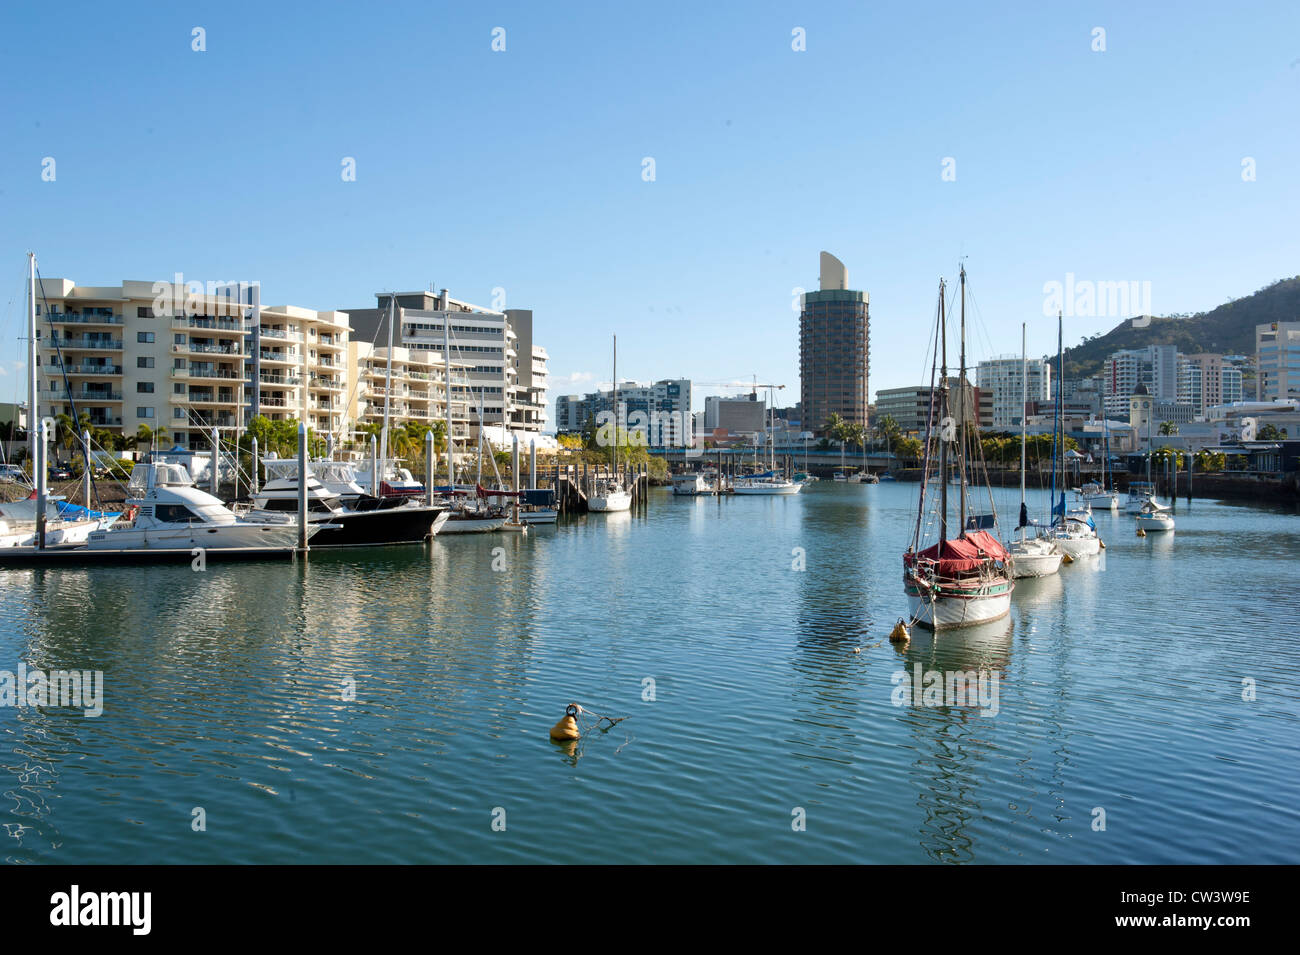 Motor boats, yachts, and sail boats moored in the Ross river, flowing through the CBD of Townsville, tropical North Queensland Stock Photo